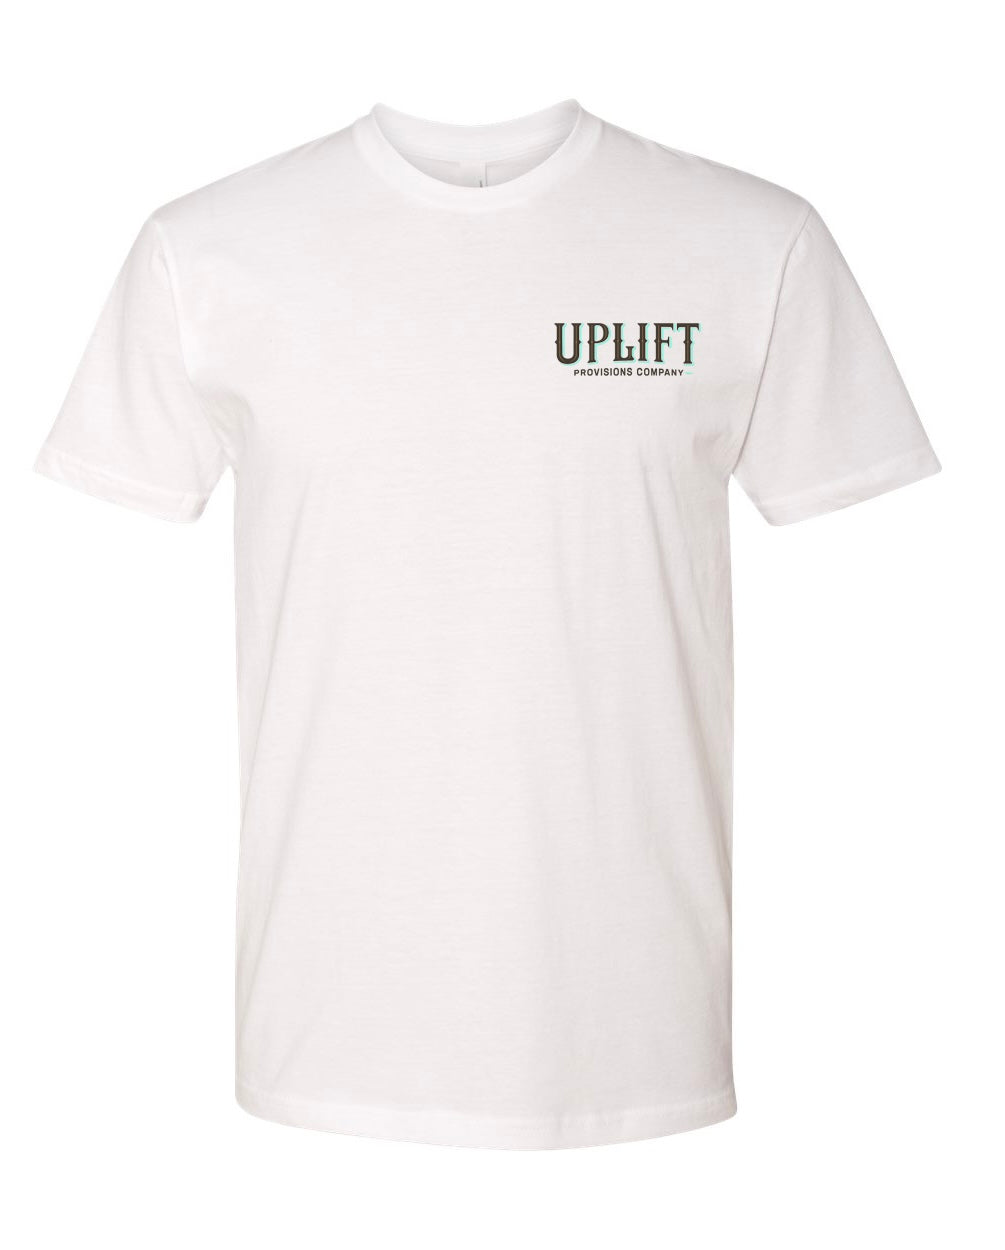 Signature Uplift - Fueled by Passion and Purpose